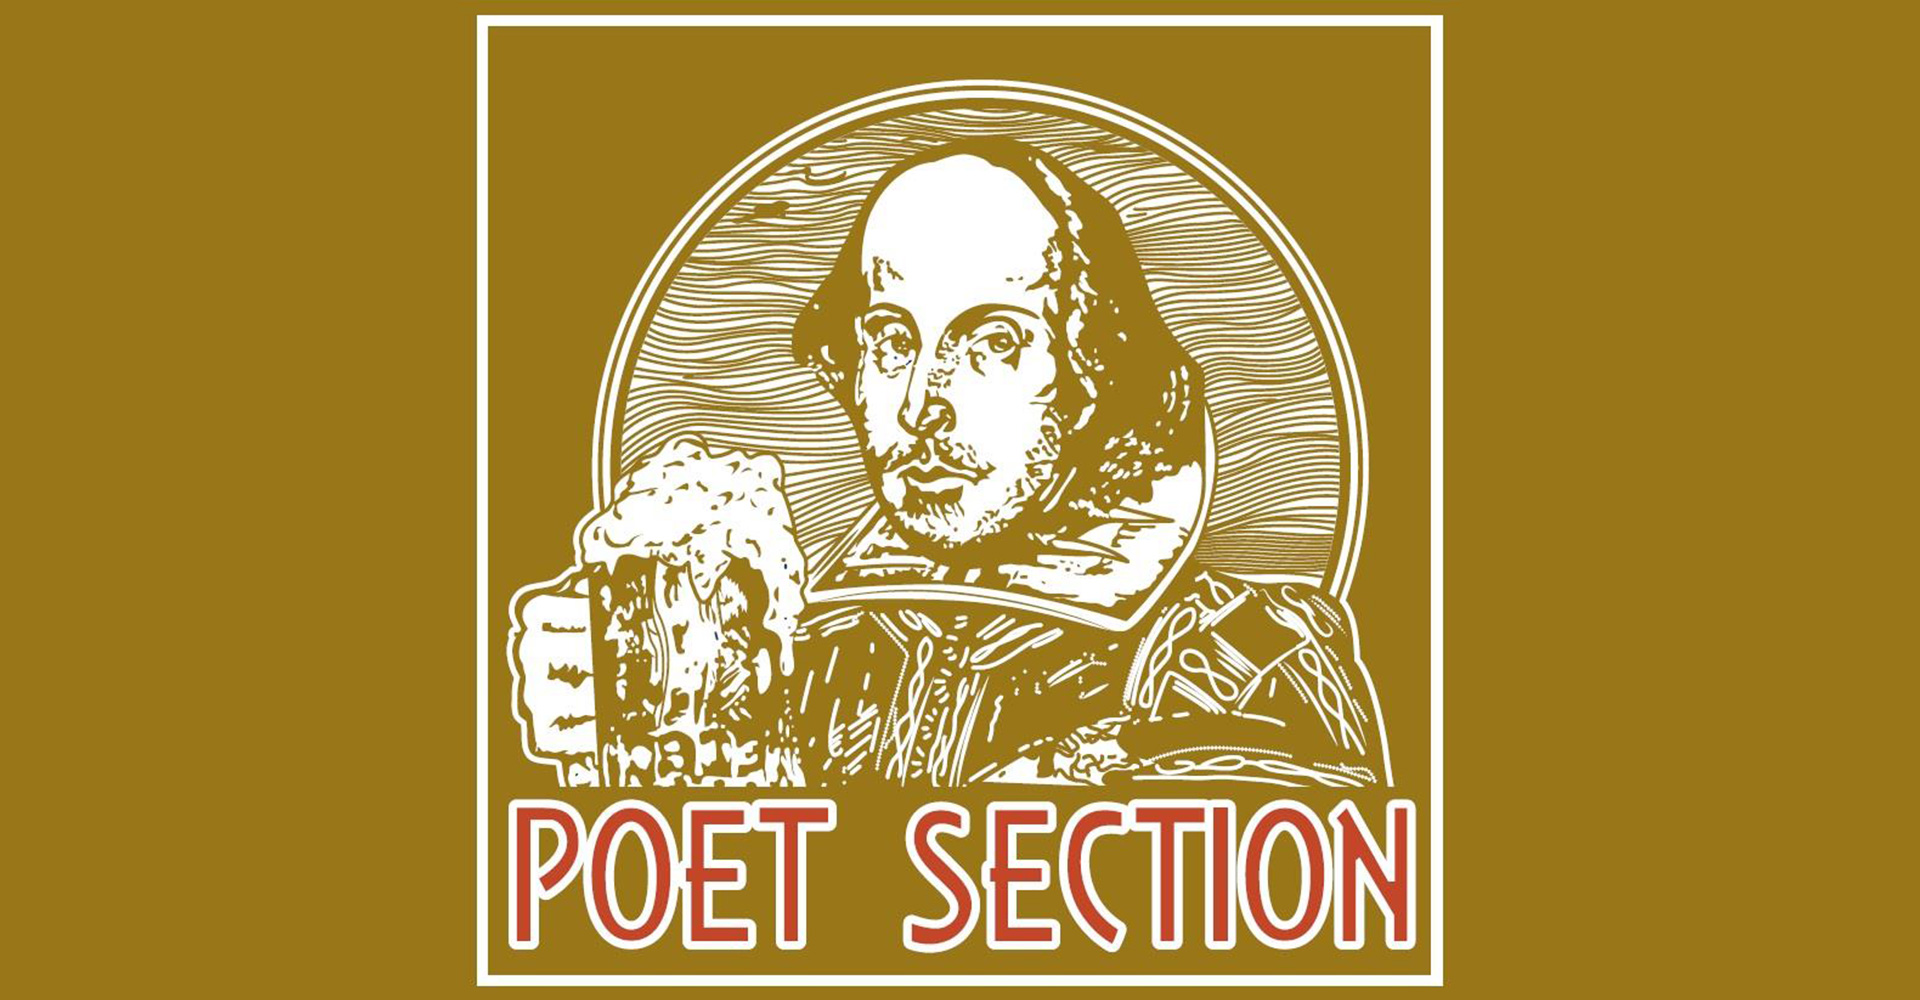 Poet Selection